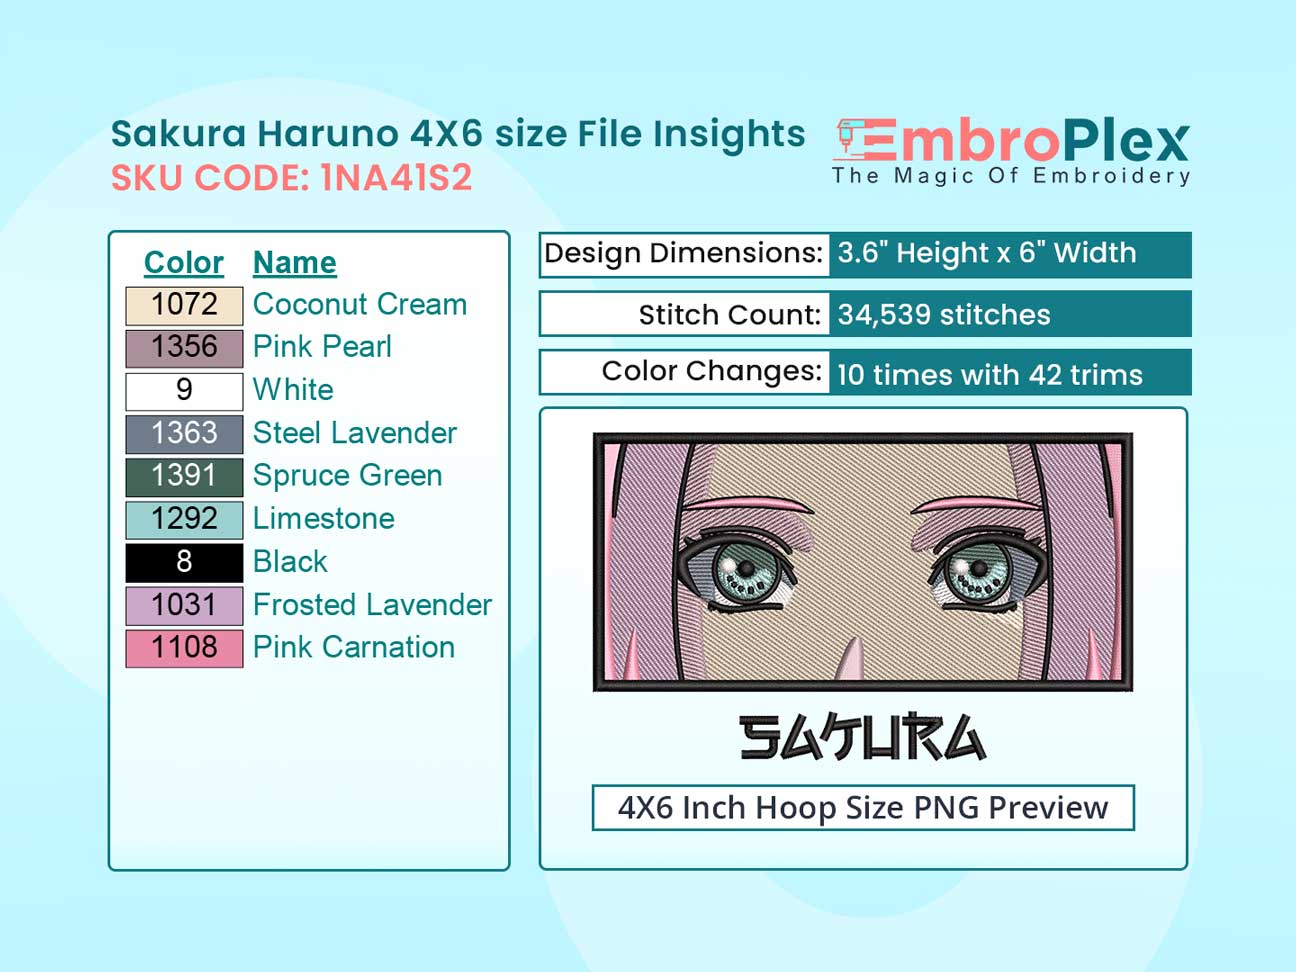 Anime-Inspired Sakura Haruno Embroidery Design File - 4x6 Inch hoop Size Variation overview image